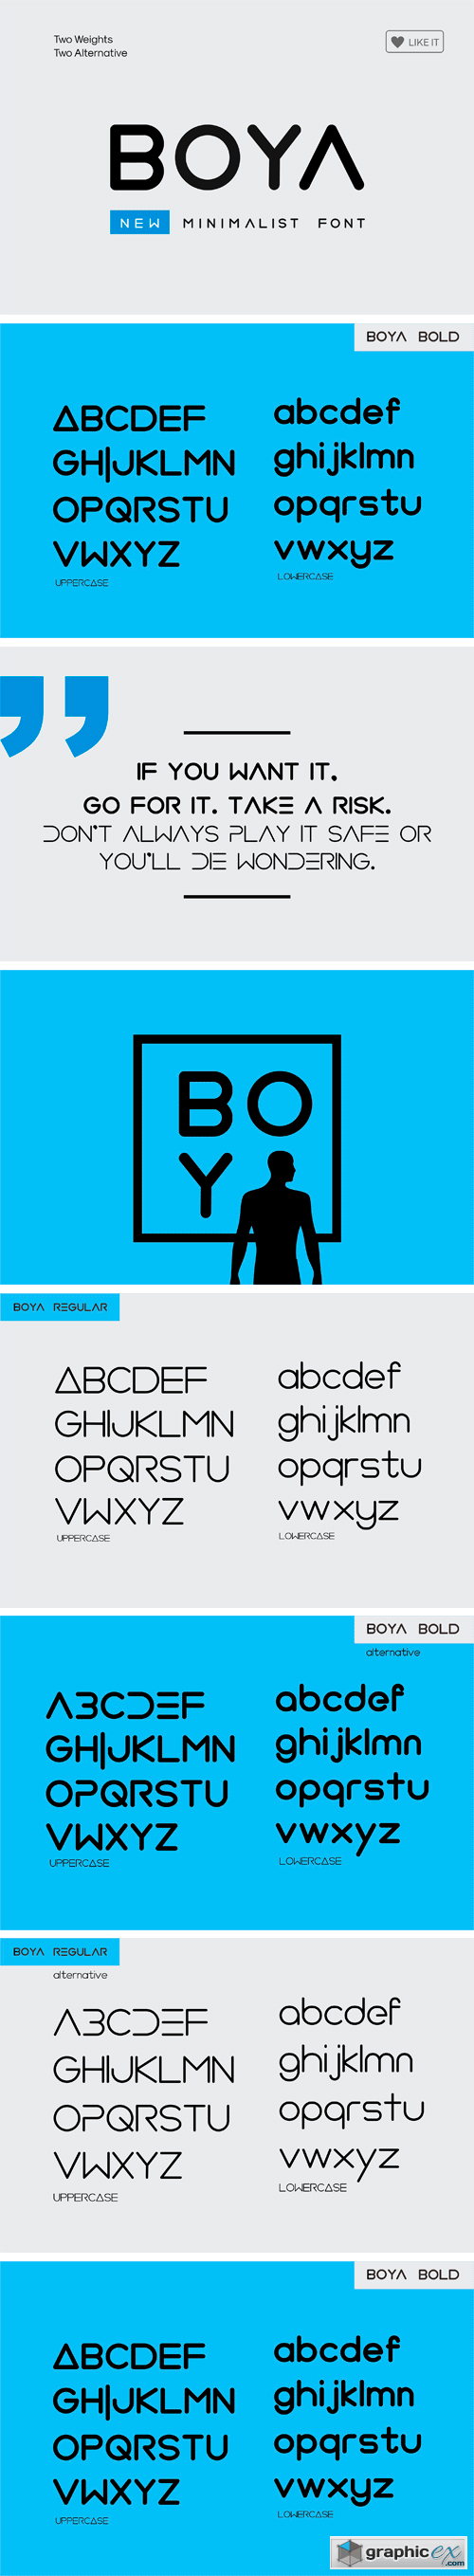 Boya Rounded Font Free Download Vector Stock Image Photoshop Icon